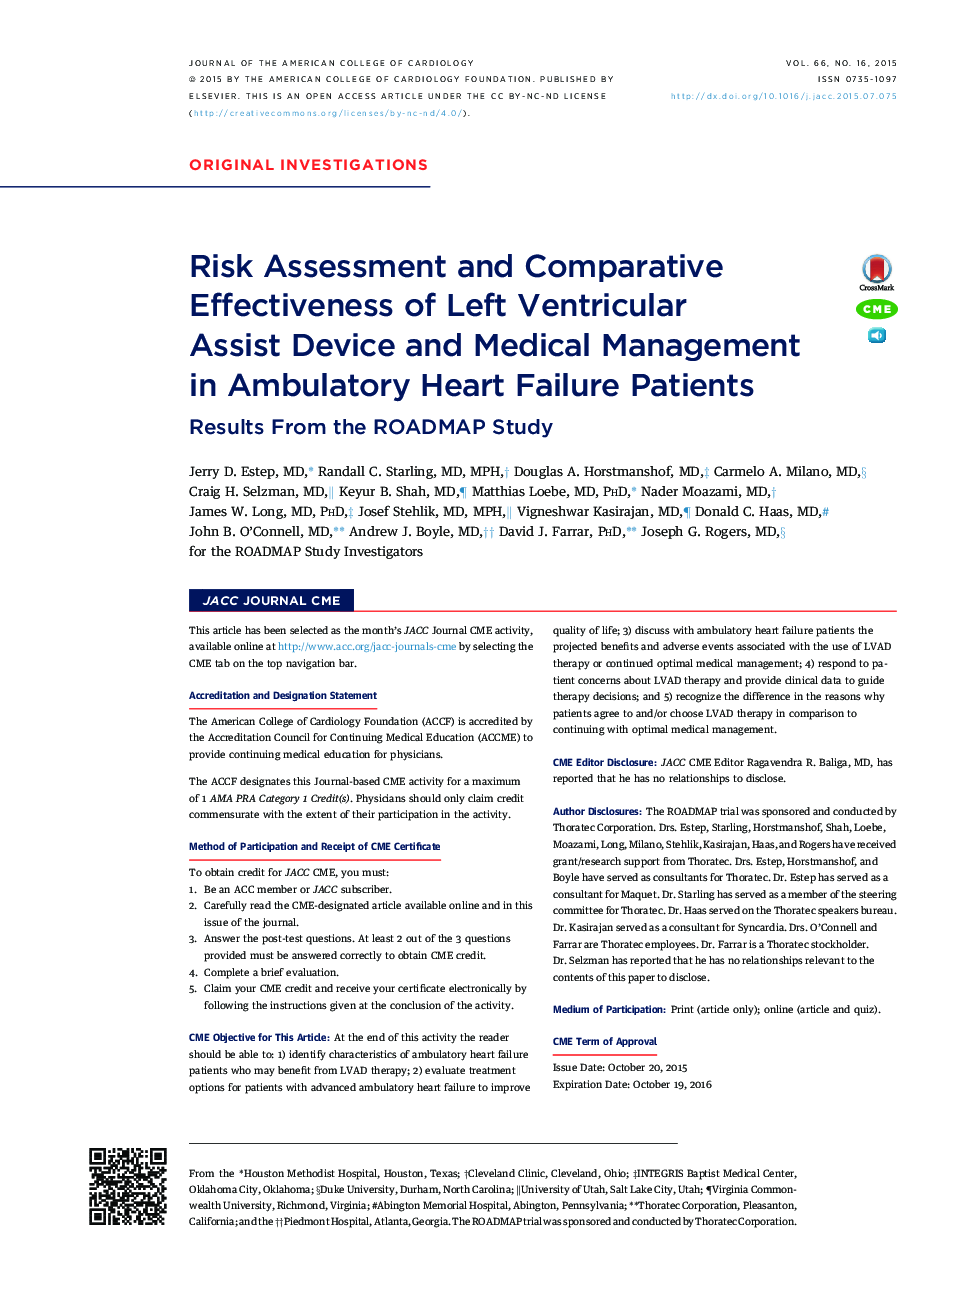 Risk Assessment and Comparative Effectiveness of Left Ventricular AssistÂ Device and Medical Management inÂ Ambulatory Heart Failure Patients: Results From the ROADMAP Study